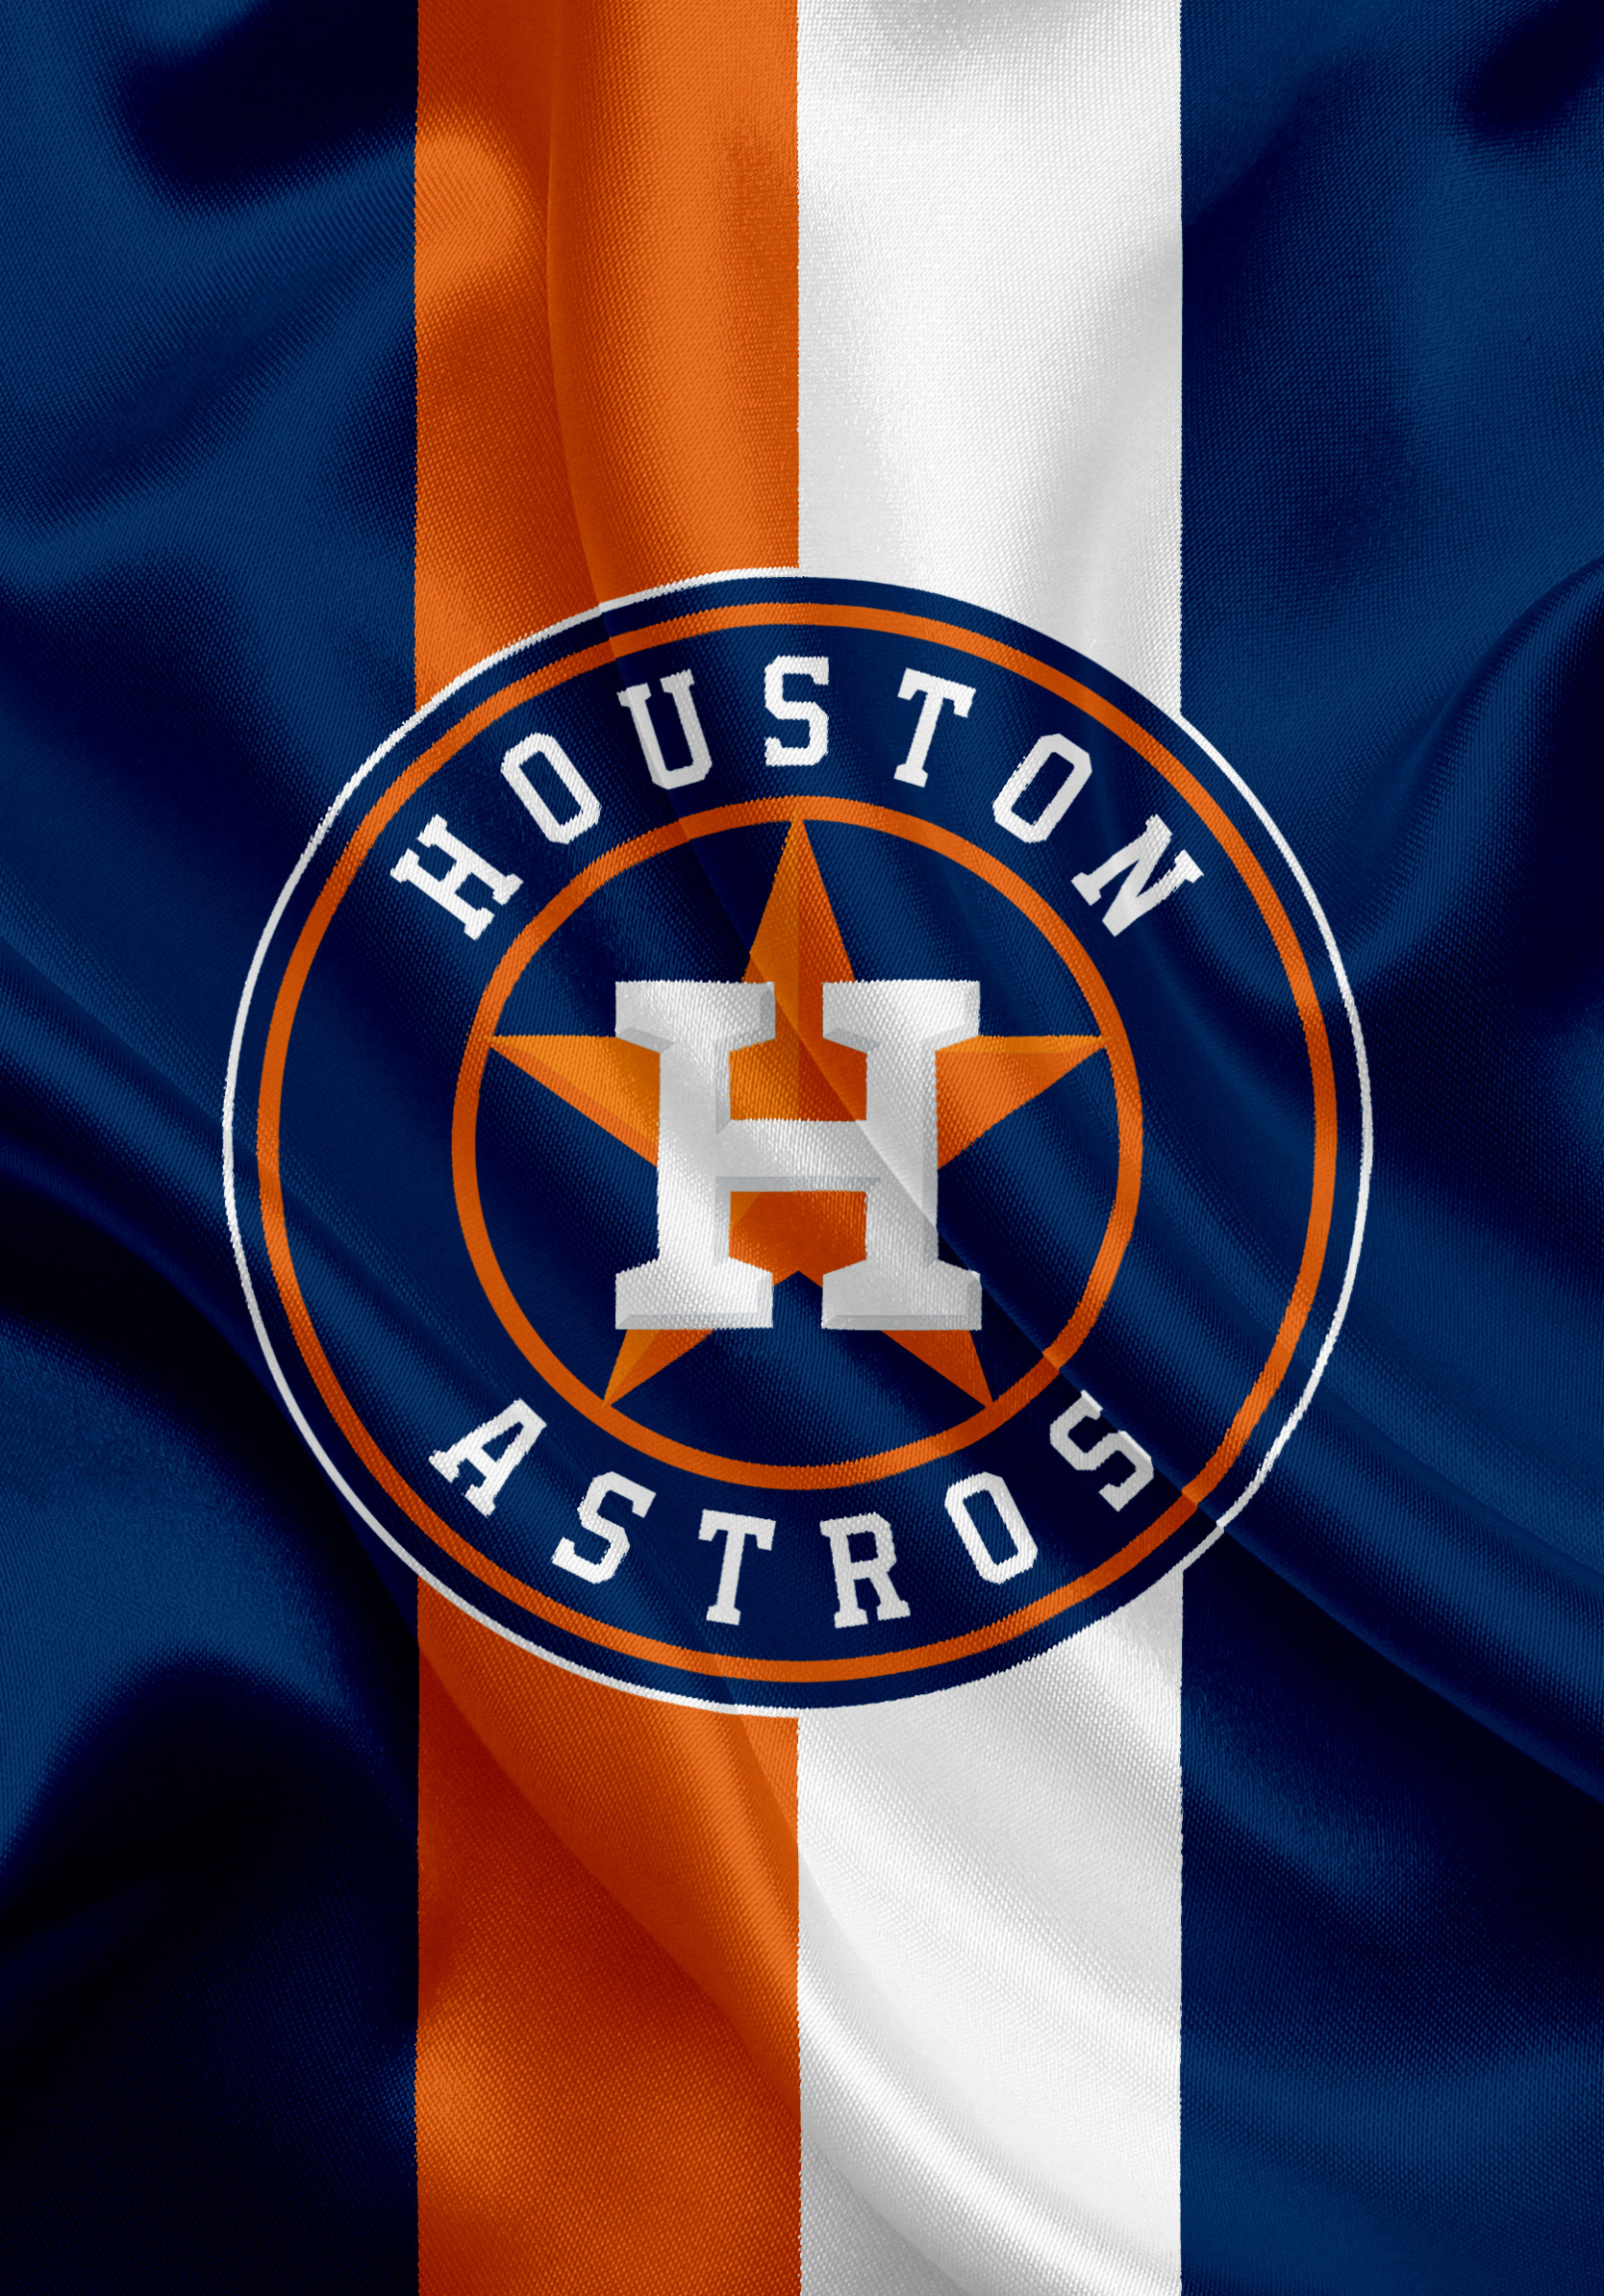 Mobile wallpaper: Sports, Logo, Baseball, Mlb, Houston Astros, 1188356  download the picture for free.